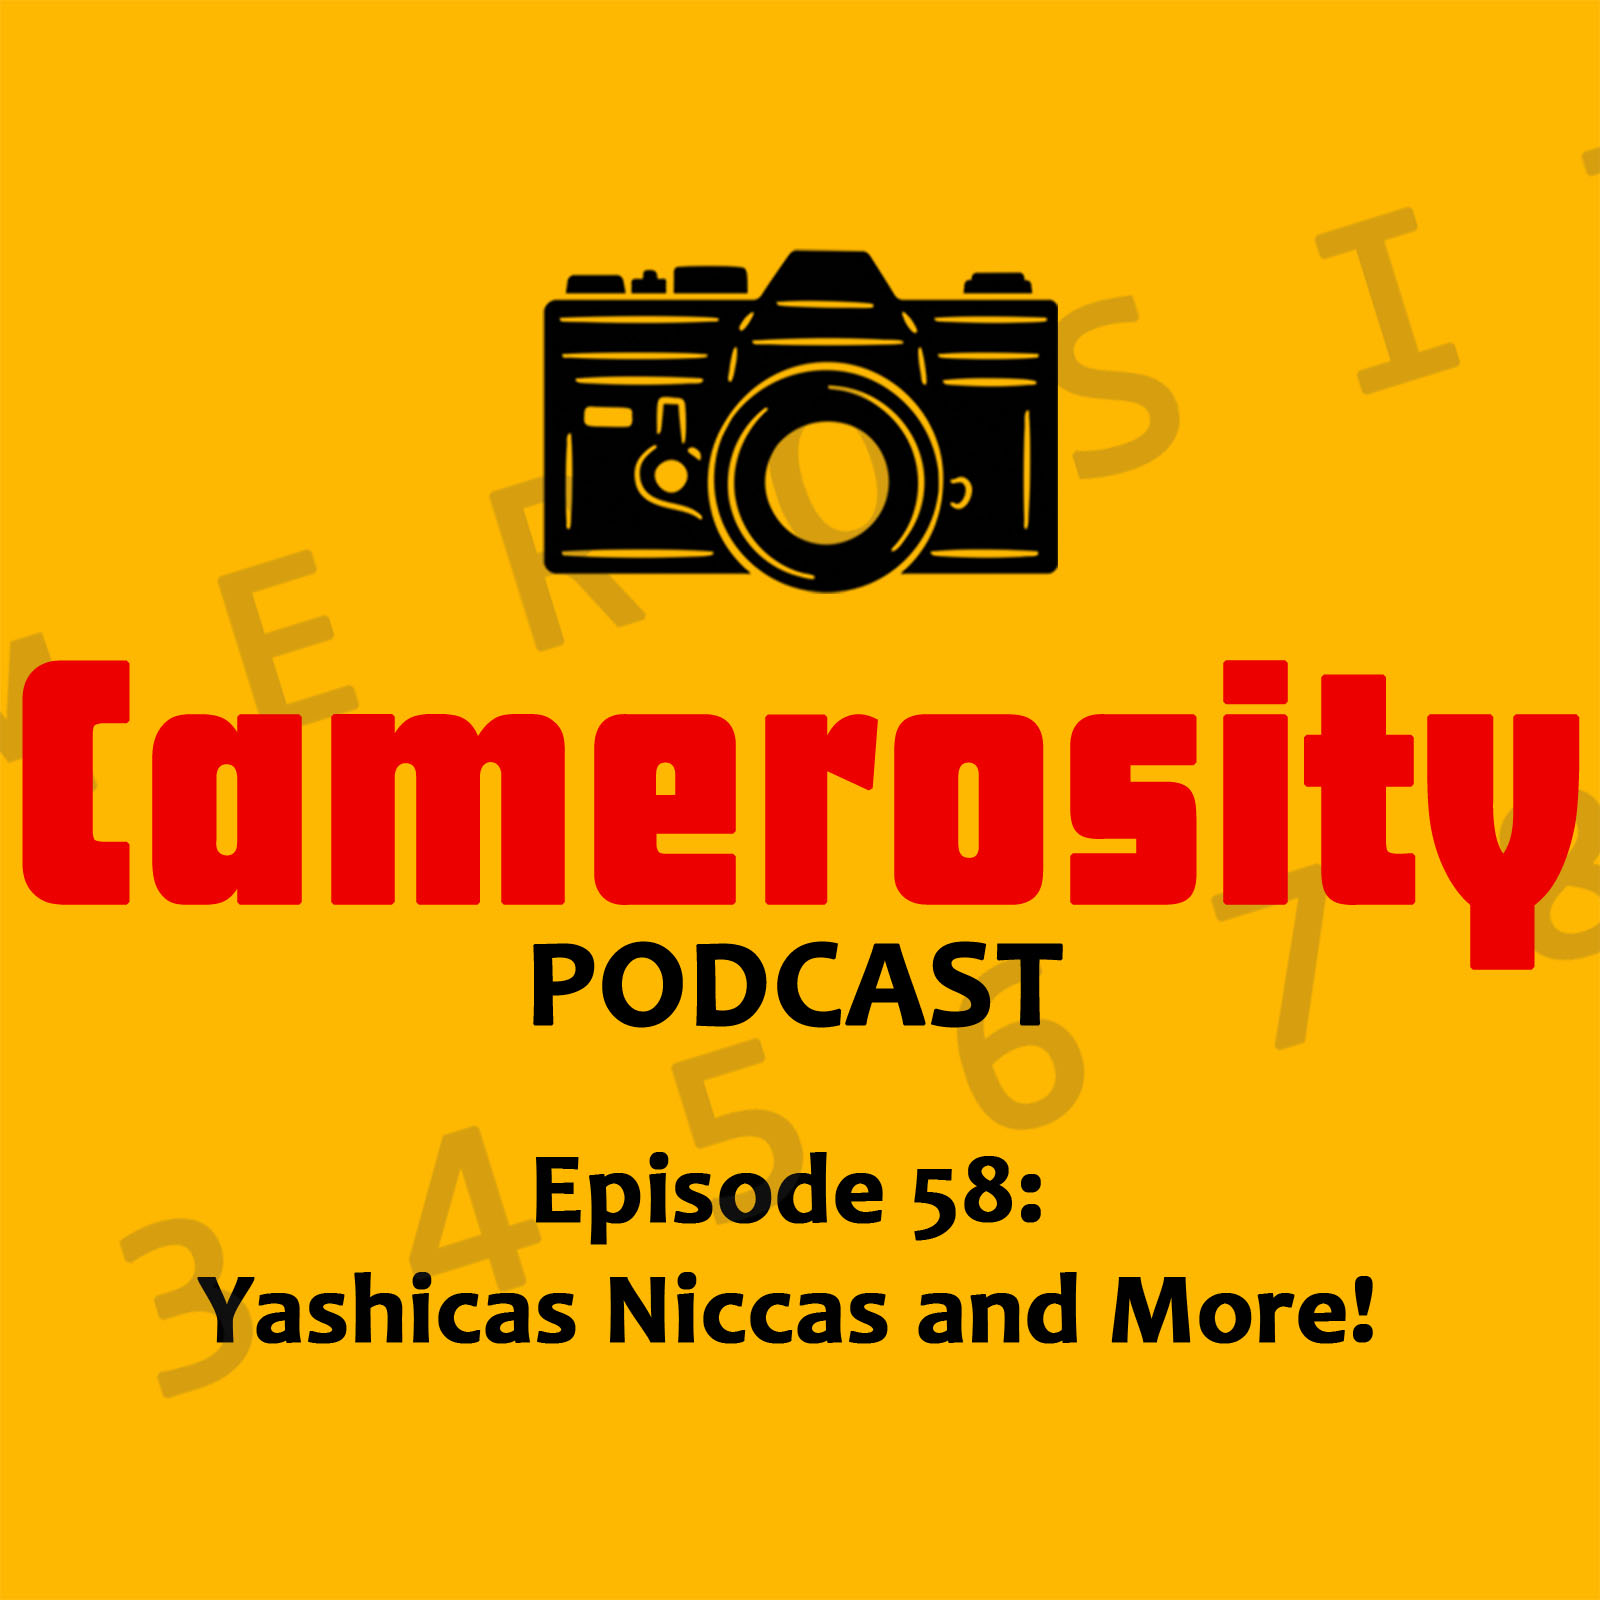 Episode 58: Yashicas Niccas and More!